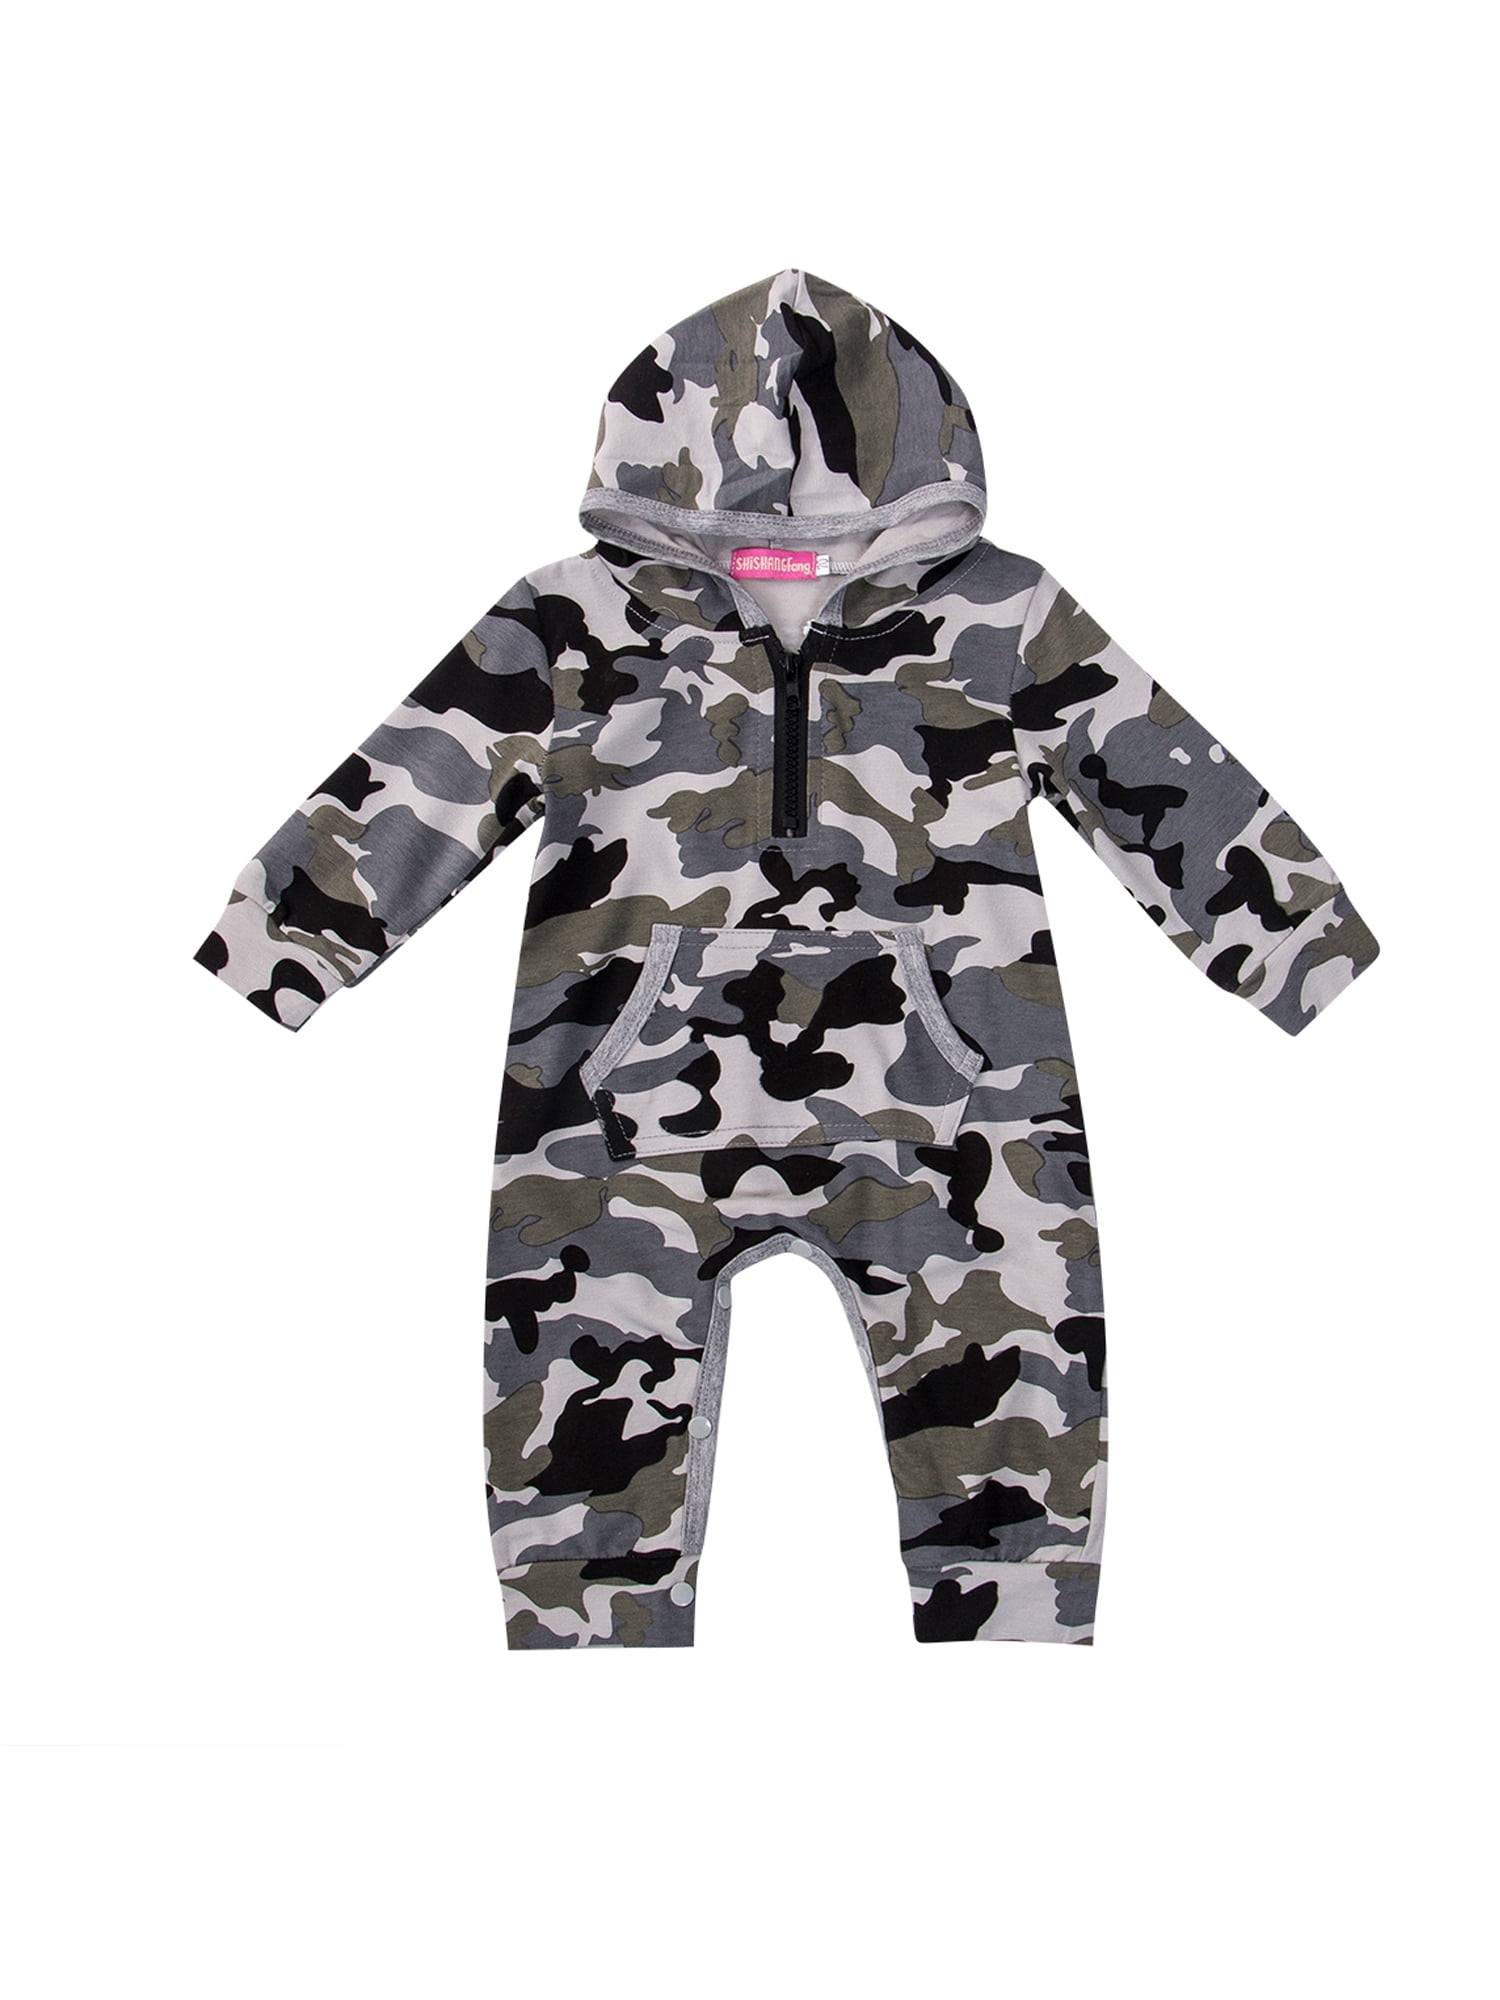 Romper Creeper Jumpsuit Coverall Jumper Baby Boys Outift Playwear 1 piece 